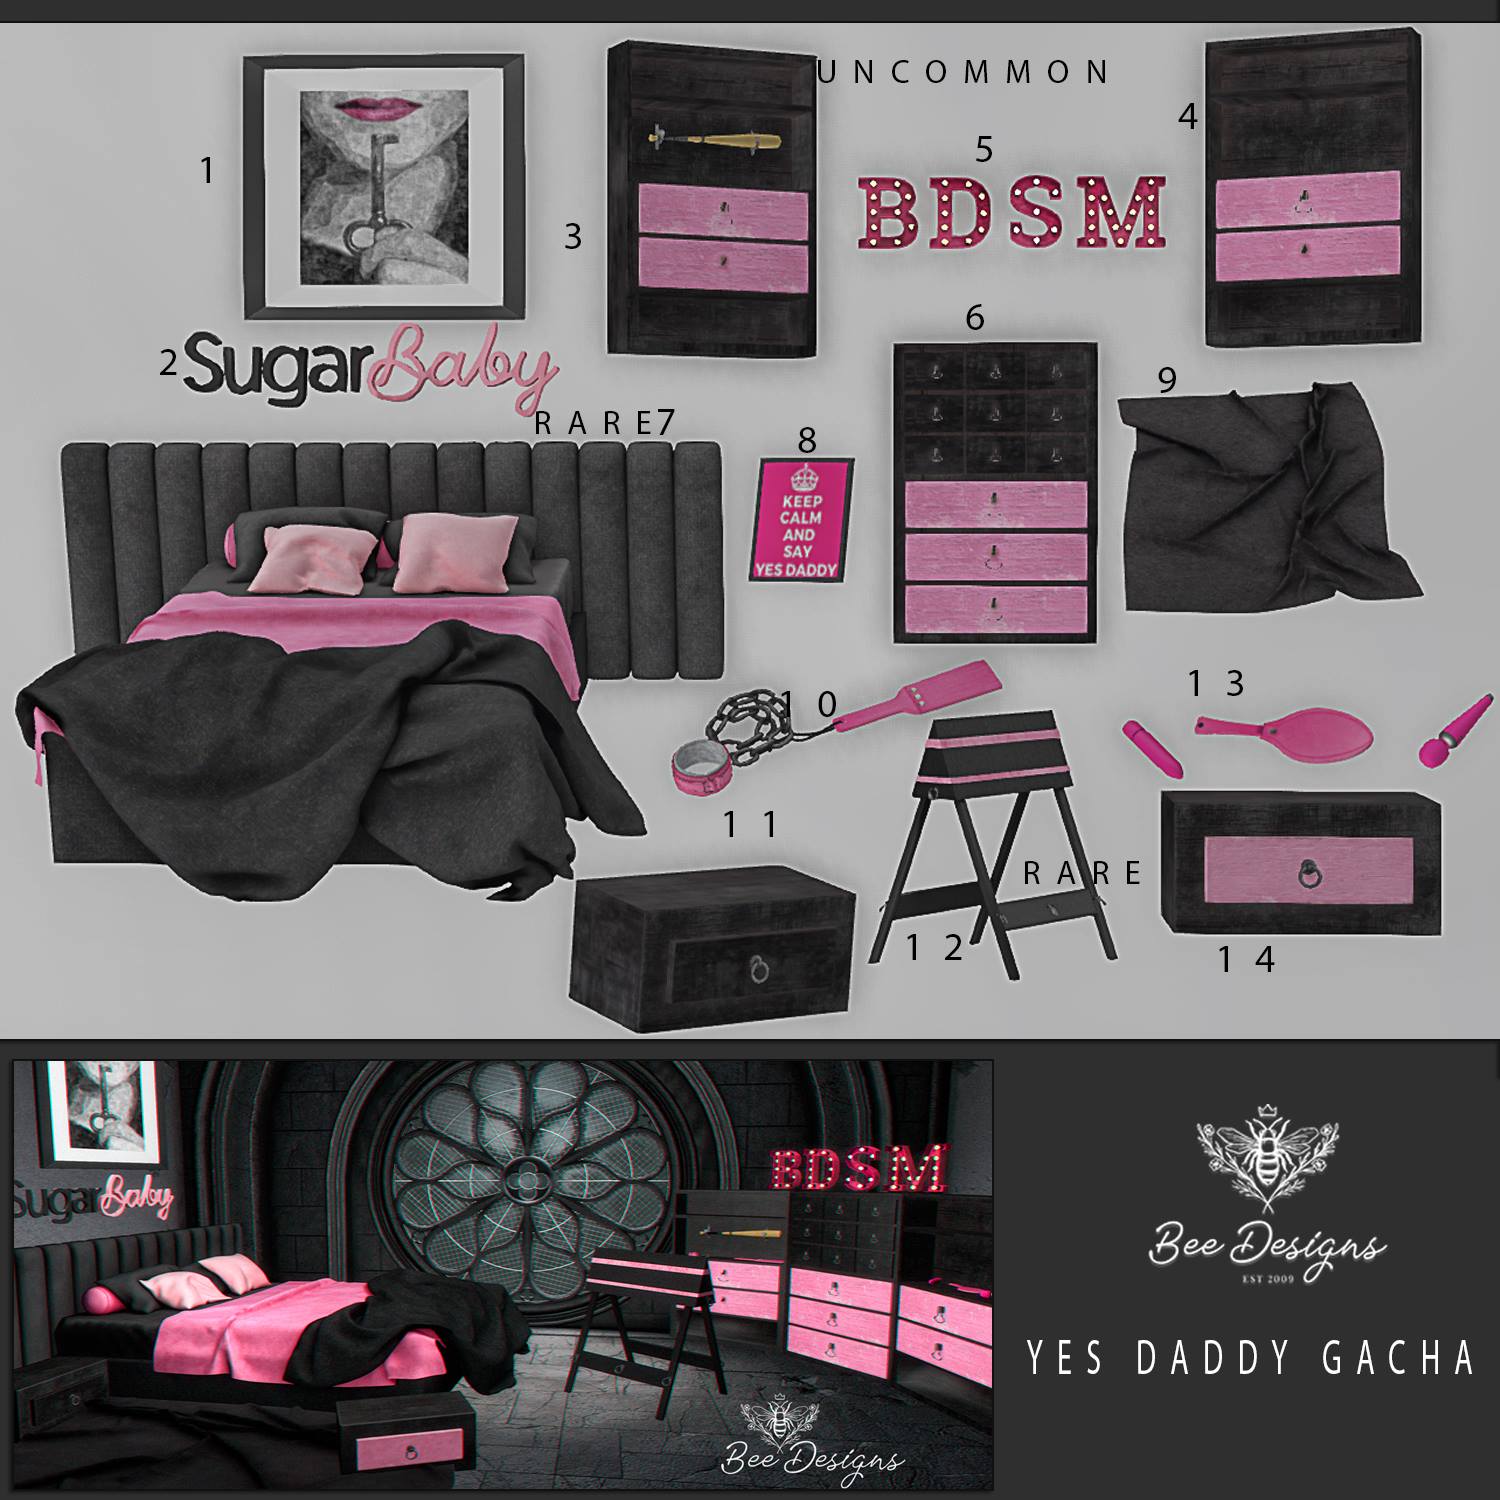 Bee Designs – Yes Daddy Wall Décor and Yes Daddy Bedroom Set Gacha